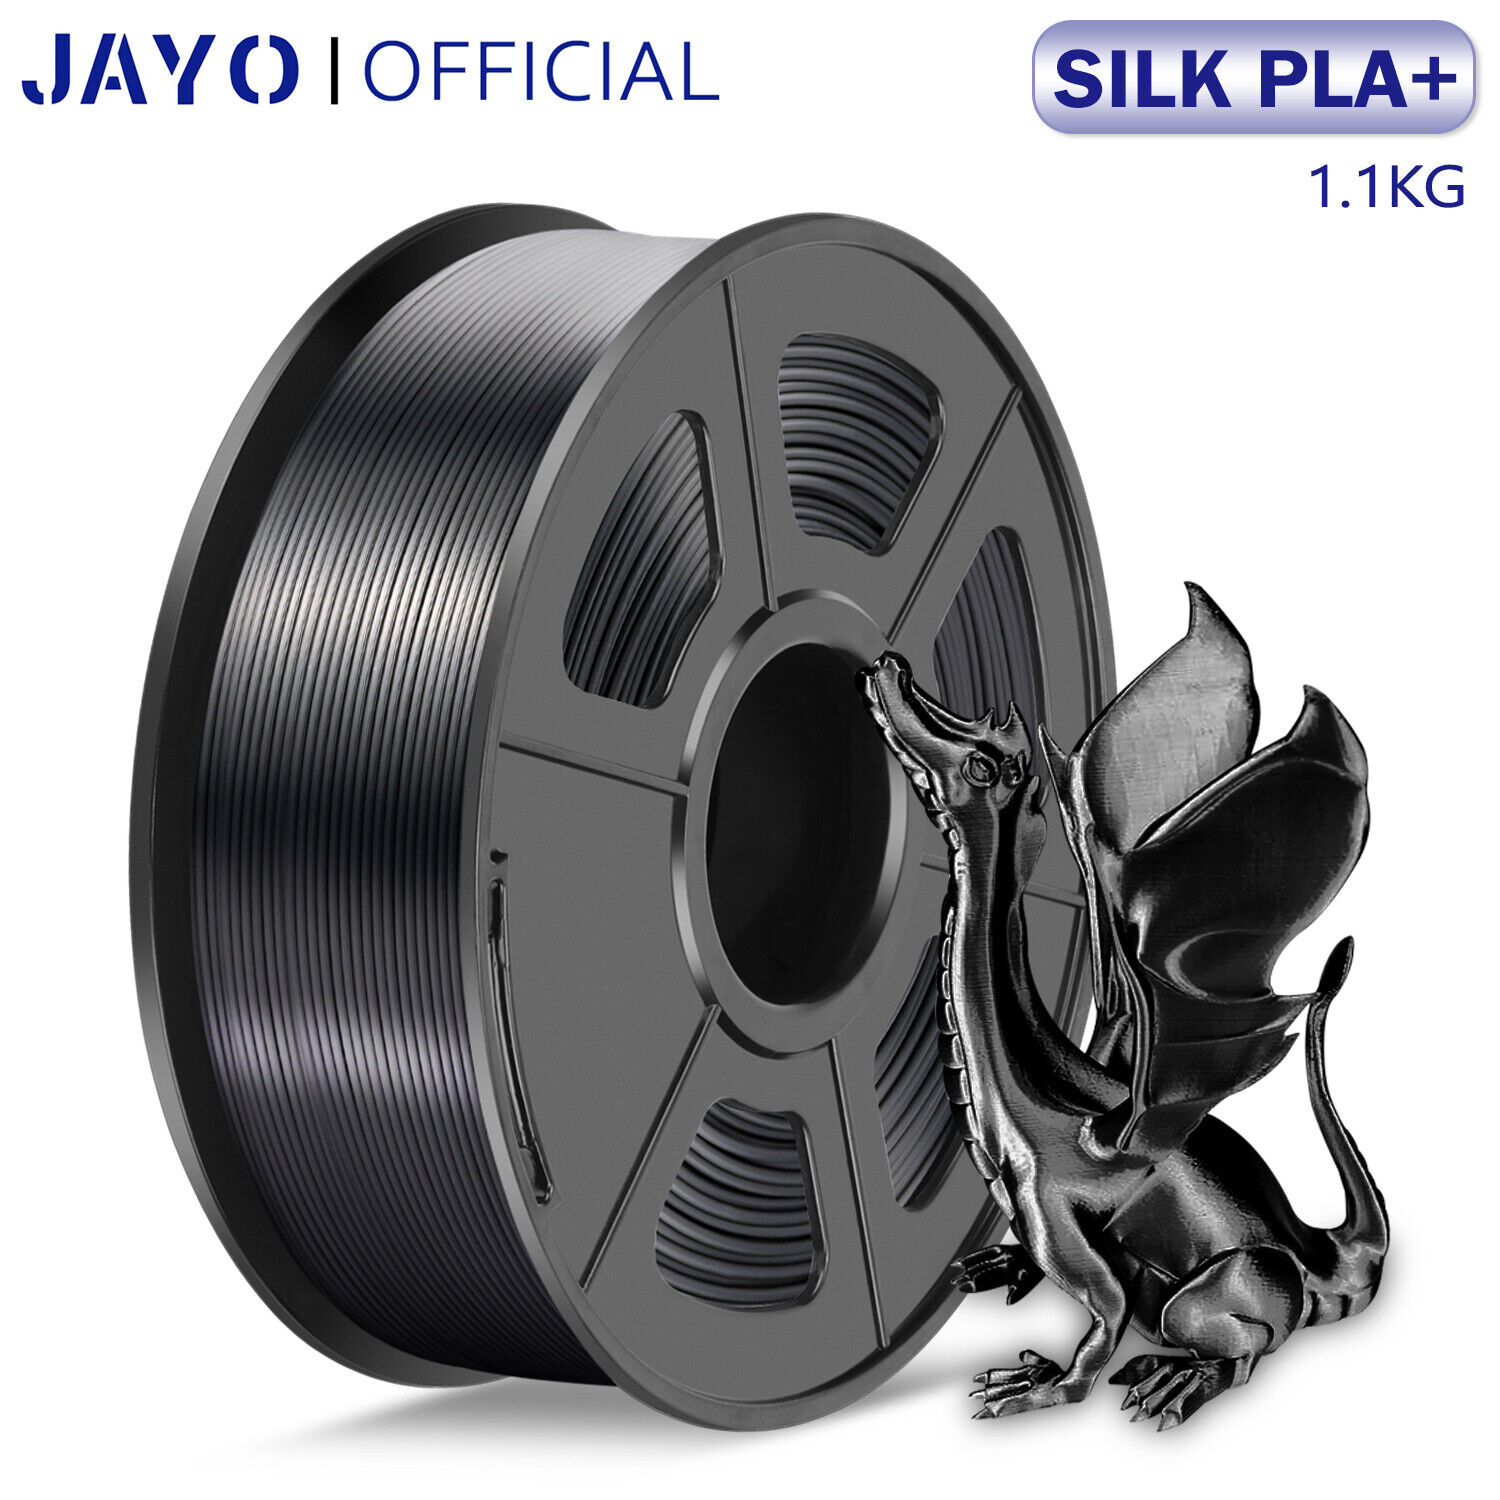 JAYO SILK PLA+ 1.75mm 3D Printer Filament 1.1KG Gold Silver Dual-color Neatly